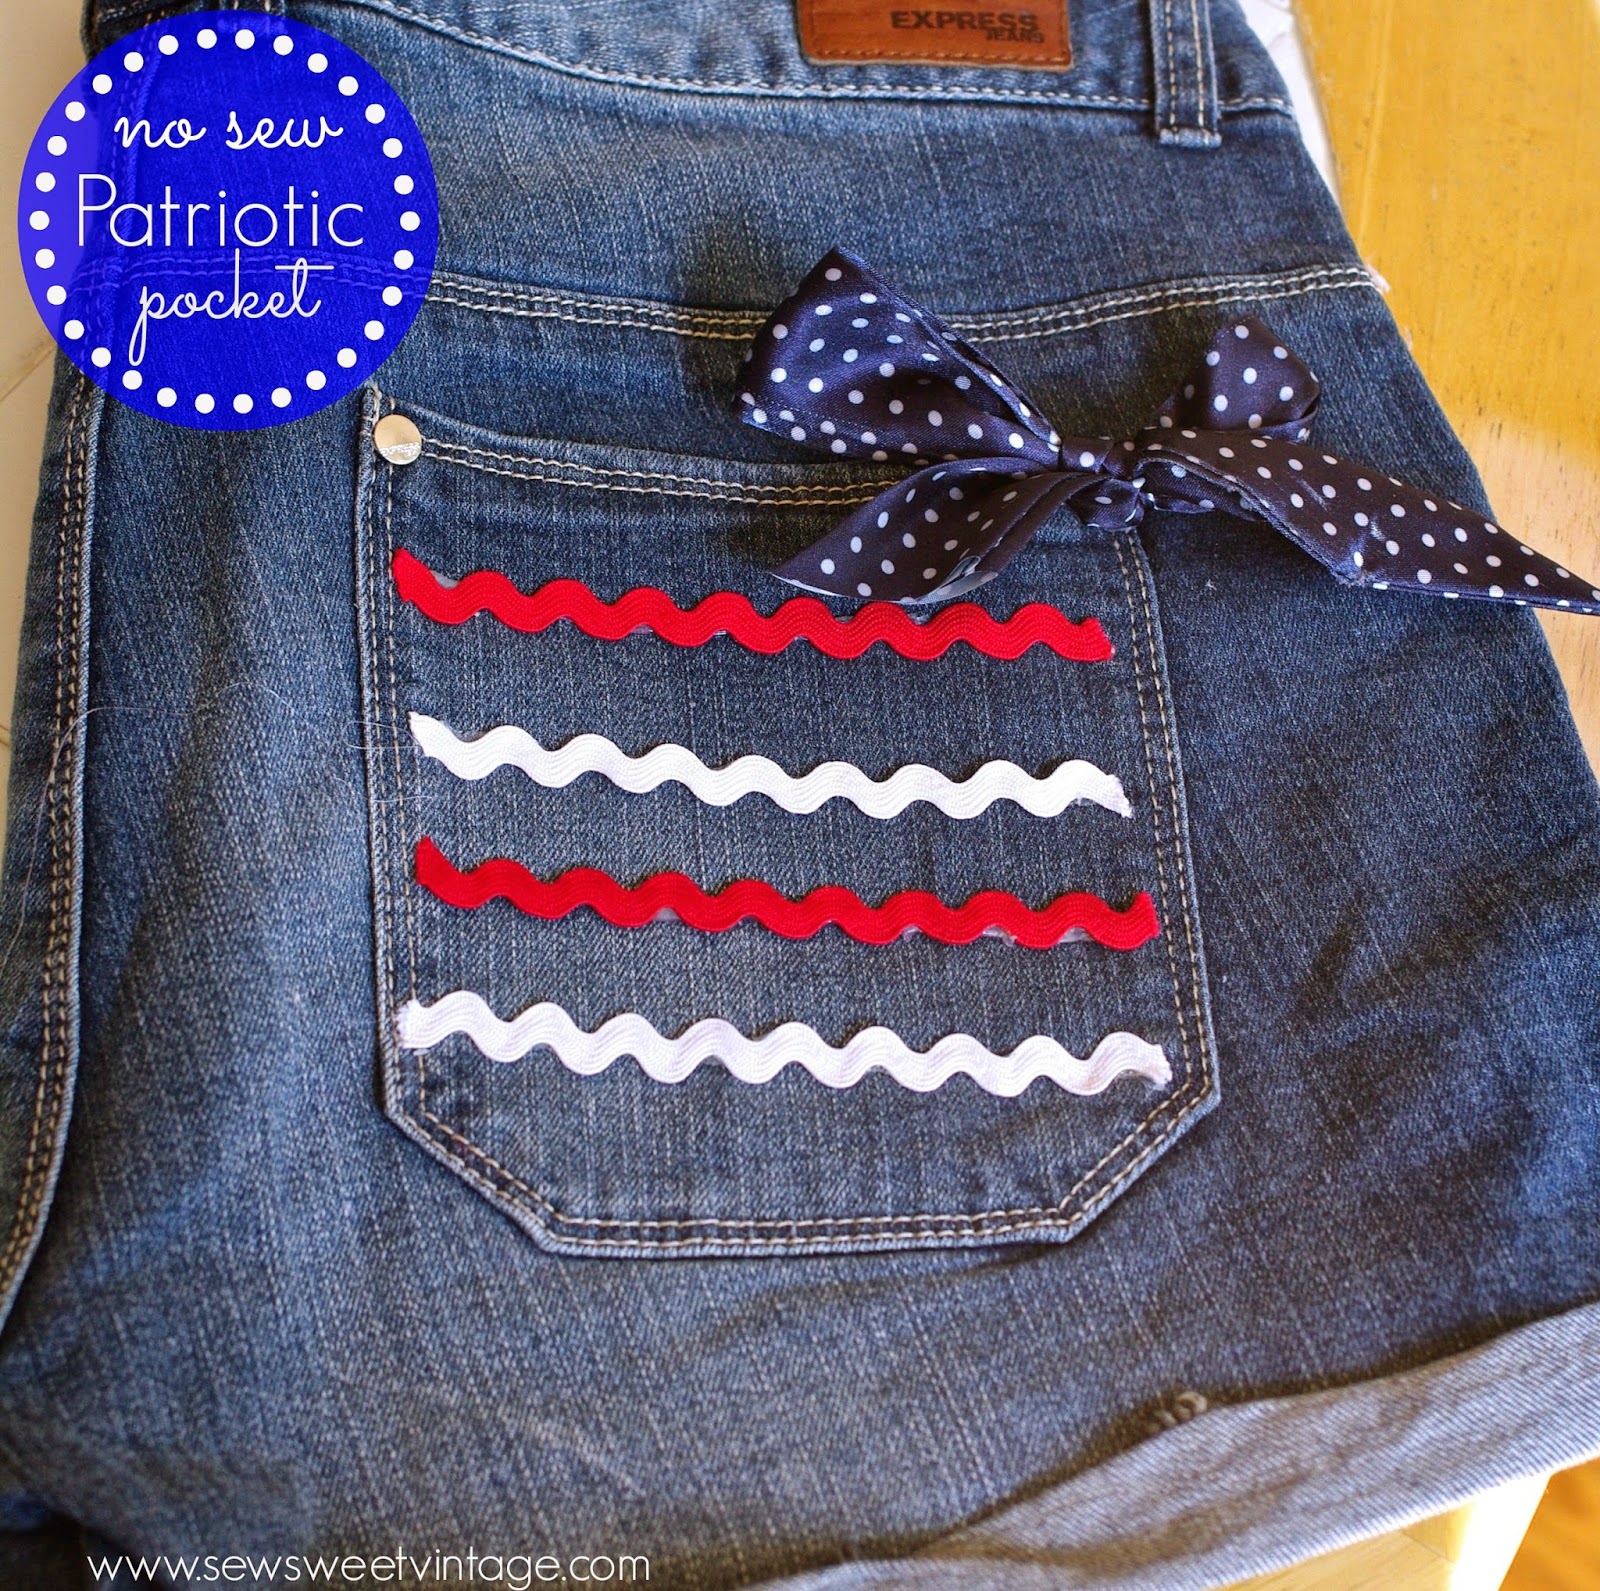 how-to make decorate your shorts with a no-sew red, white and blue, patriotic pocket for July 4th